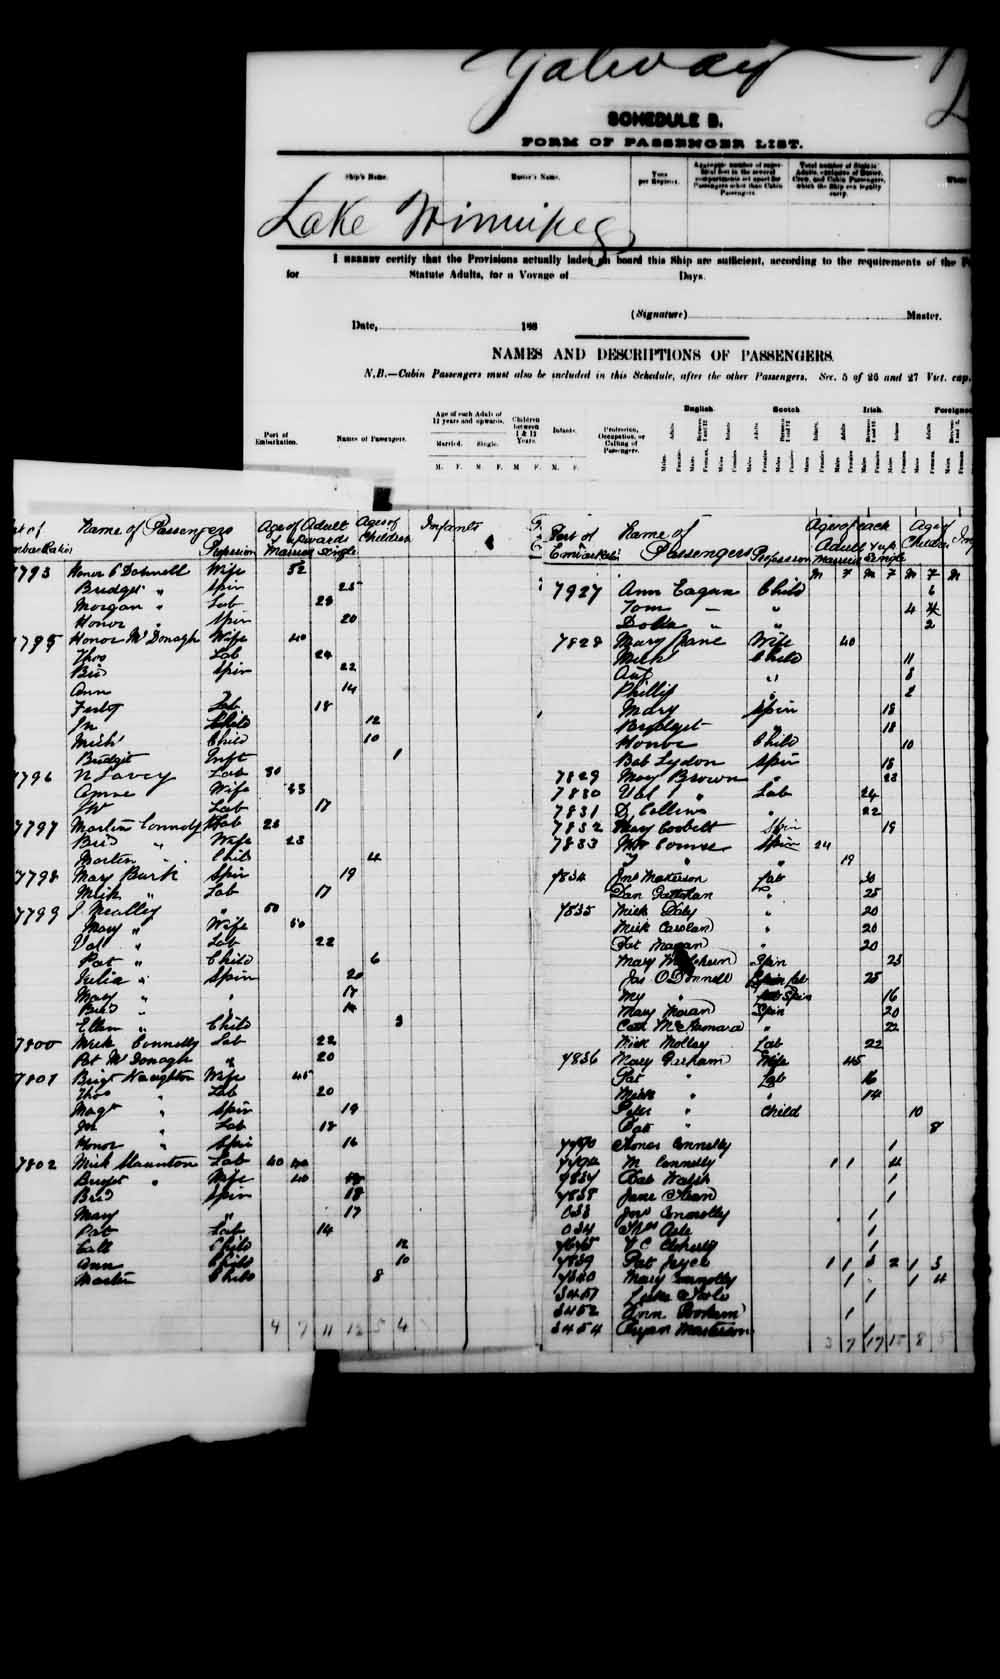 Digitized page of Passenger Lists for Image No.: e003541626